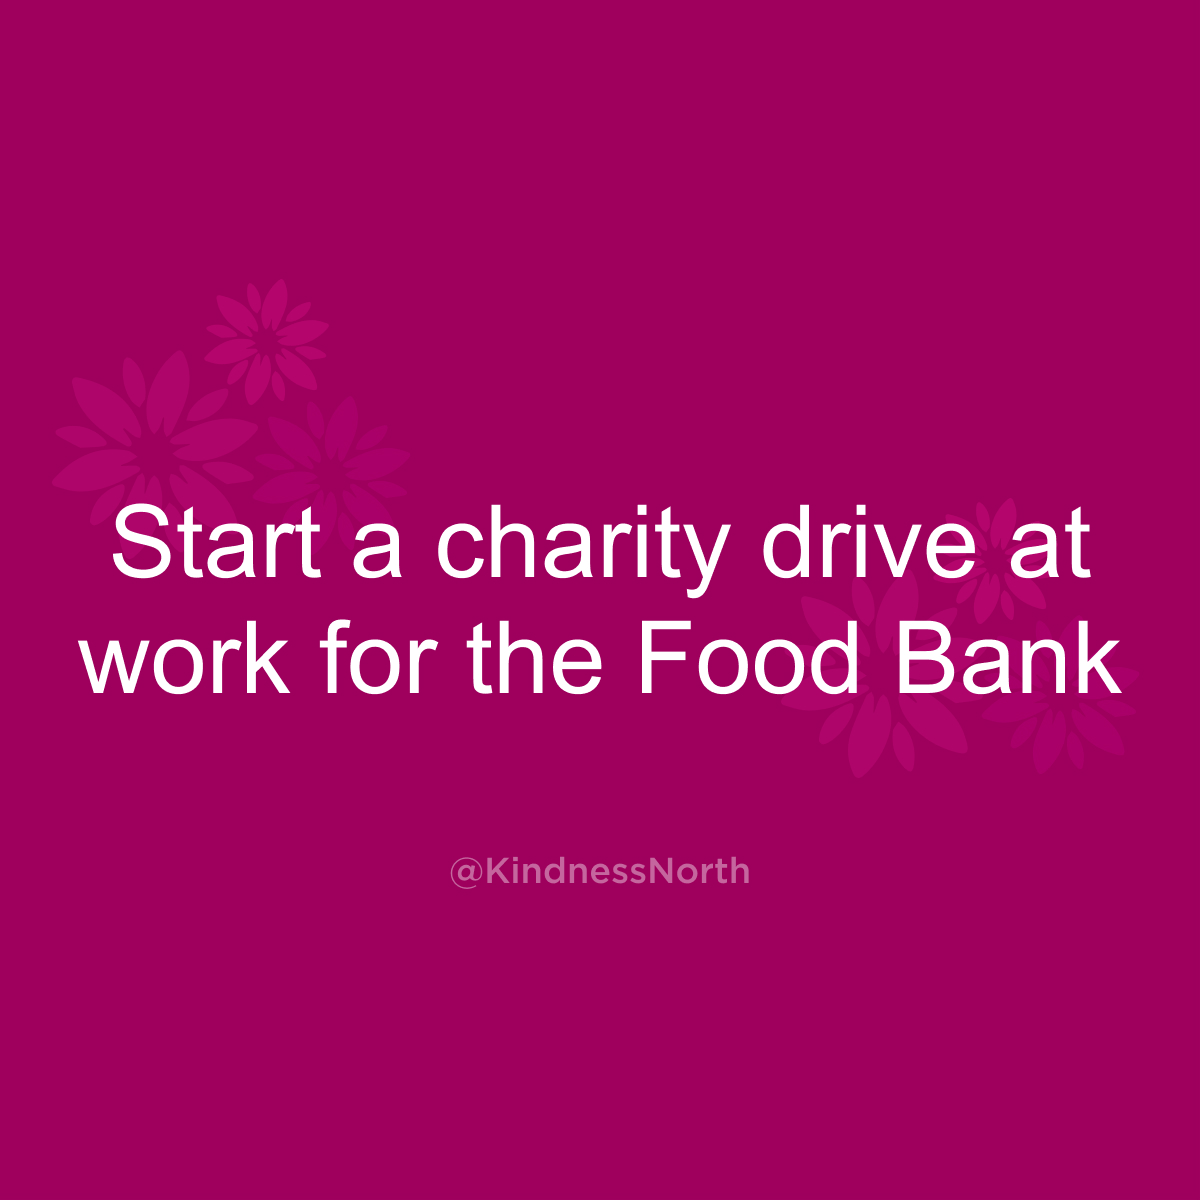 Start a charity drive at work for the Food Bank